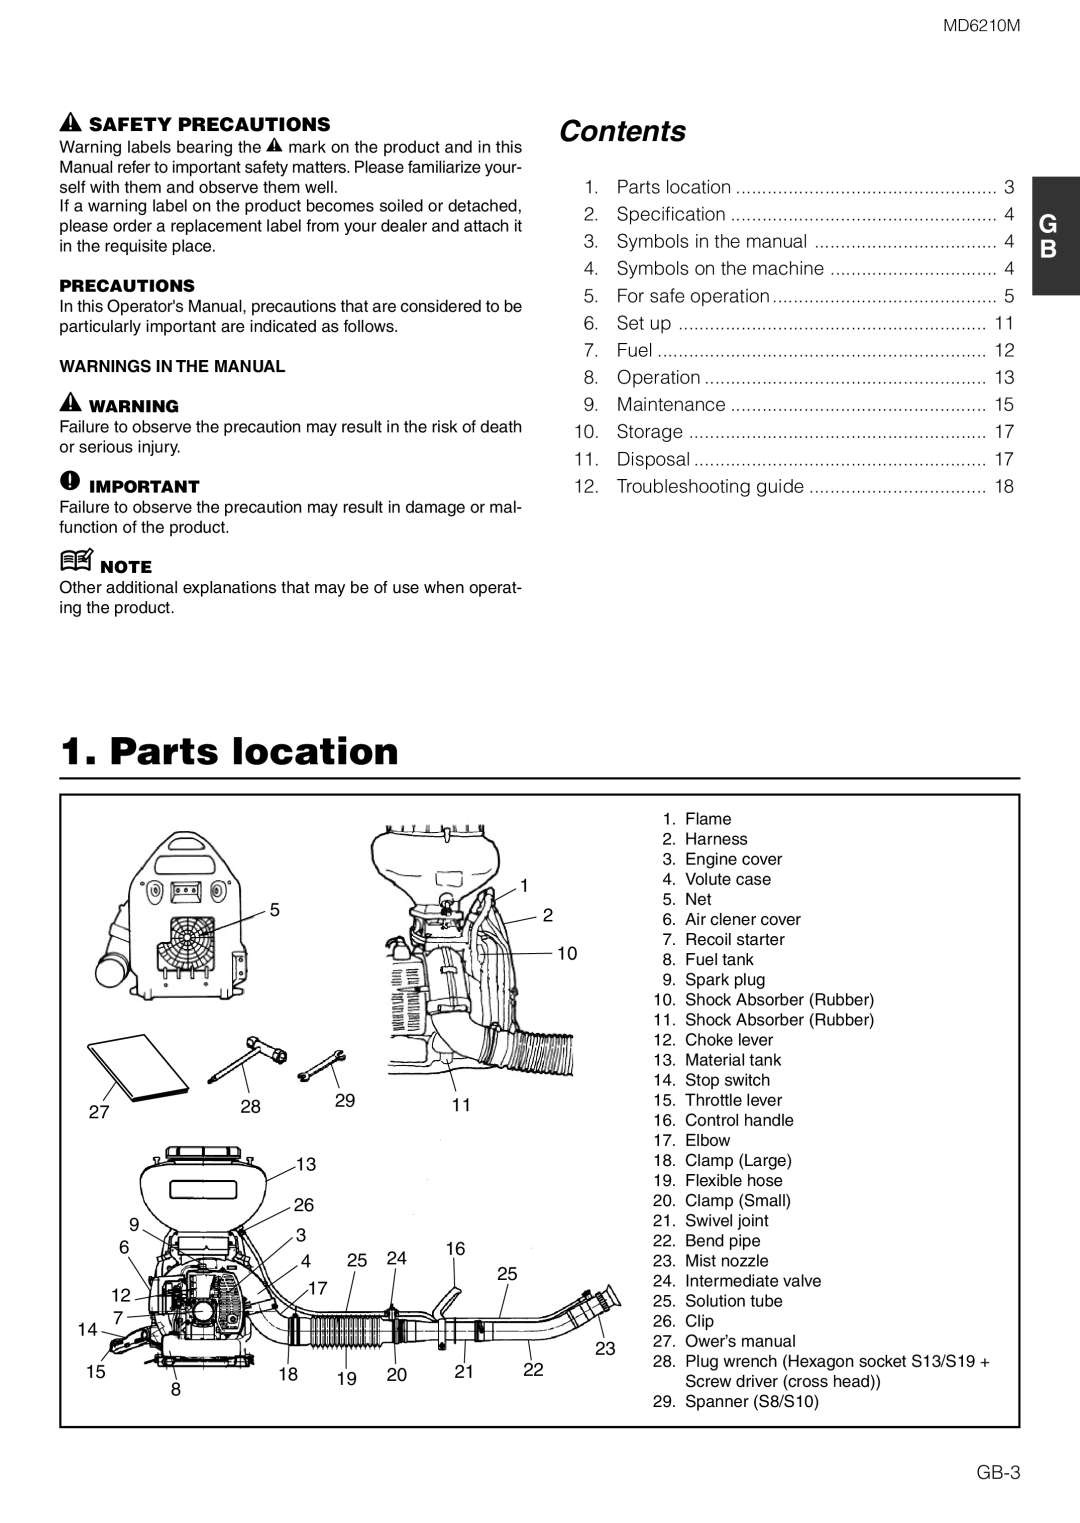 Zenoah MD6210M owner manual Parts location, Safety Precautions, Contents 